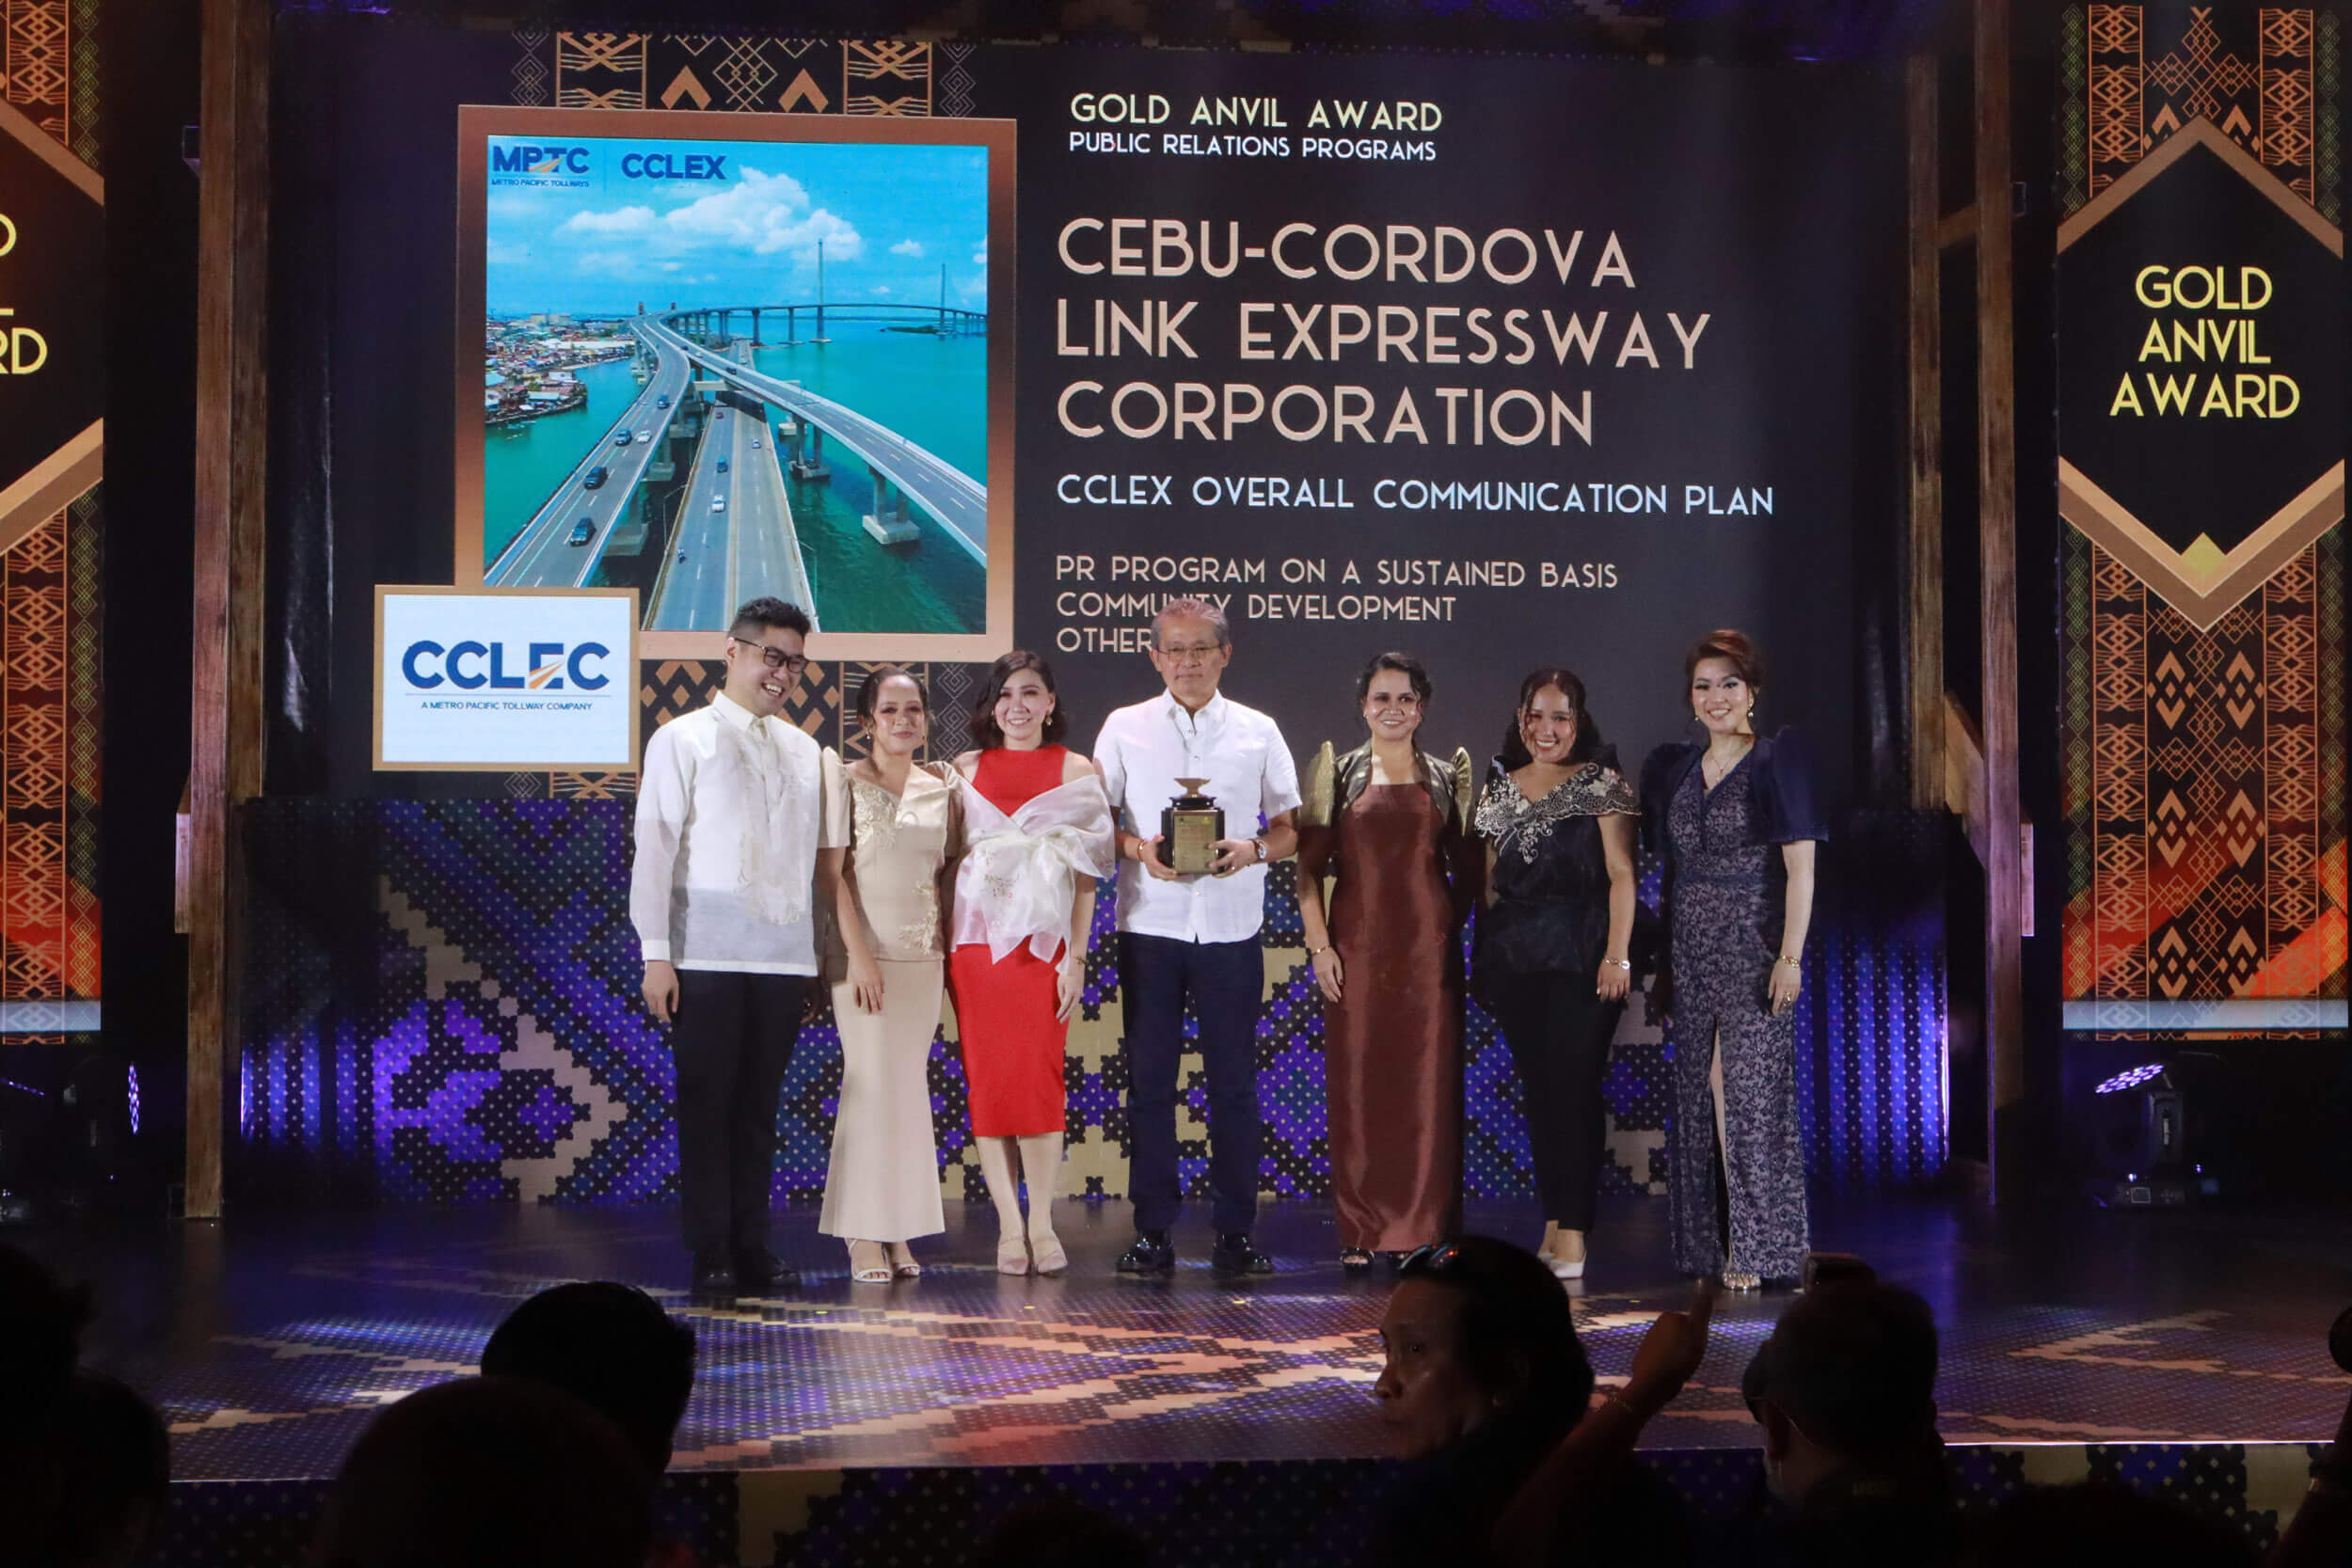 GOLD ANVIL. The CCLEC team receives a Gold Anvil for its communication campaign to introduce the 8.9-kilometer Cebu-Cordova Link Expressway to Cebuano motorists. Accepting the awards for CCLEC are President and General Manager Allan G. Alfon (center) and the CCLEC Communications and Stakeholders Management (CSM) team – Jasmin G. Suma-oy, Princess Dawn H. Felicitas, Imare Sheen B. Gutang, Kendall A. Roa, and Carryl D. Alpuerto.
